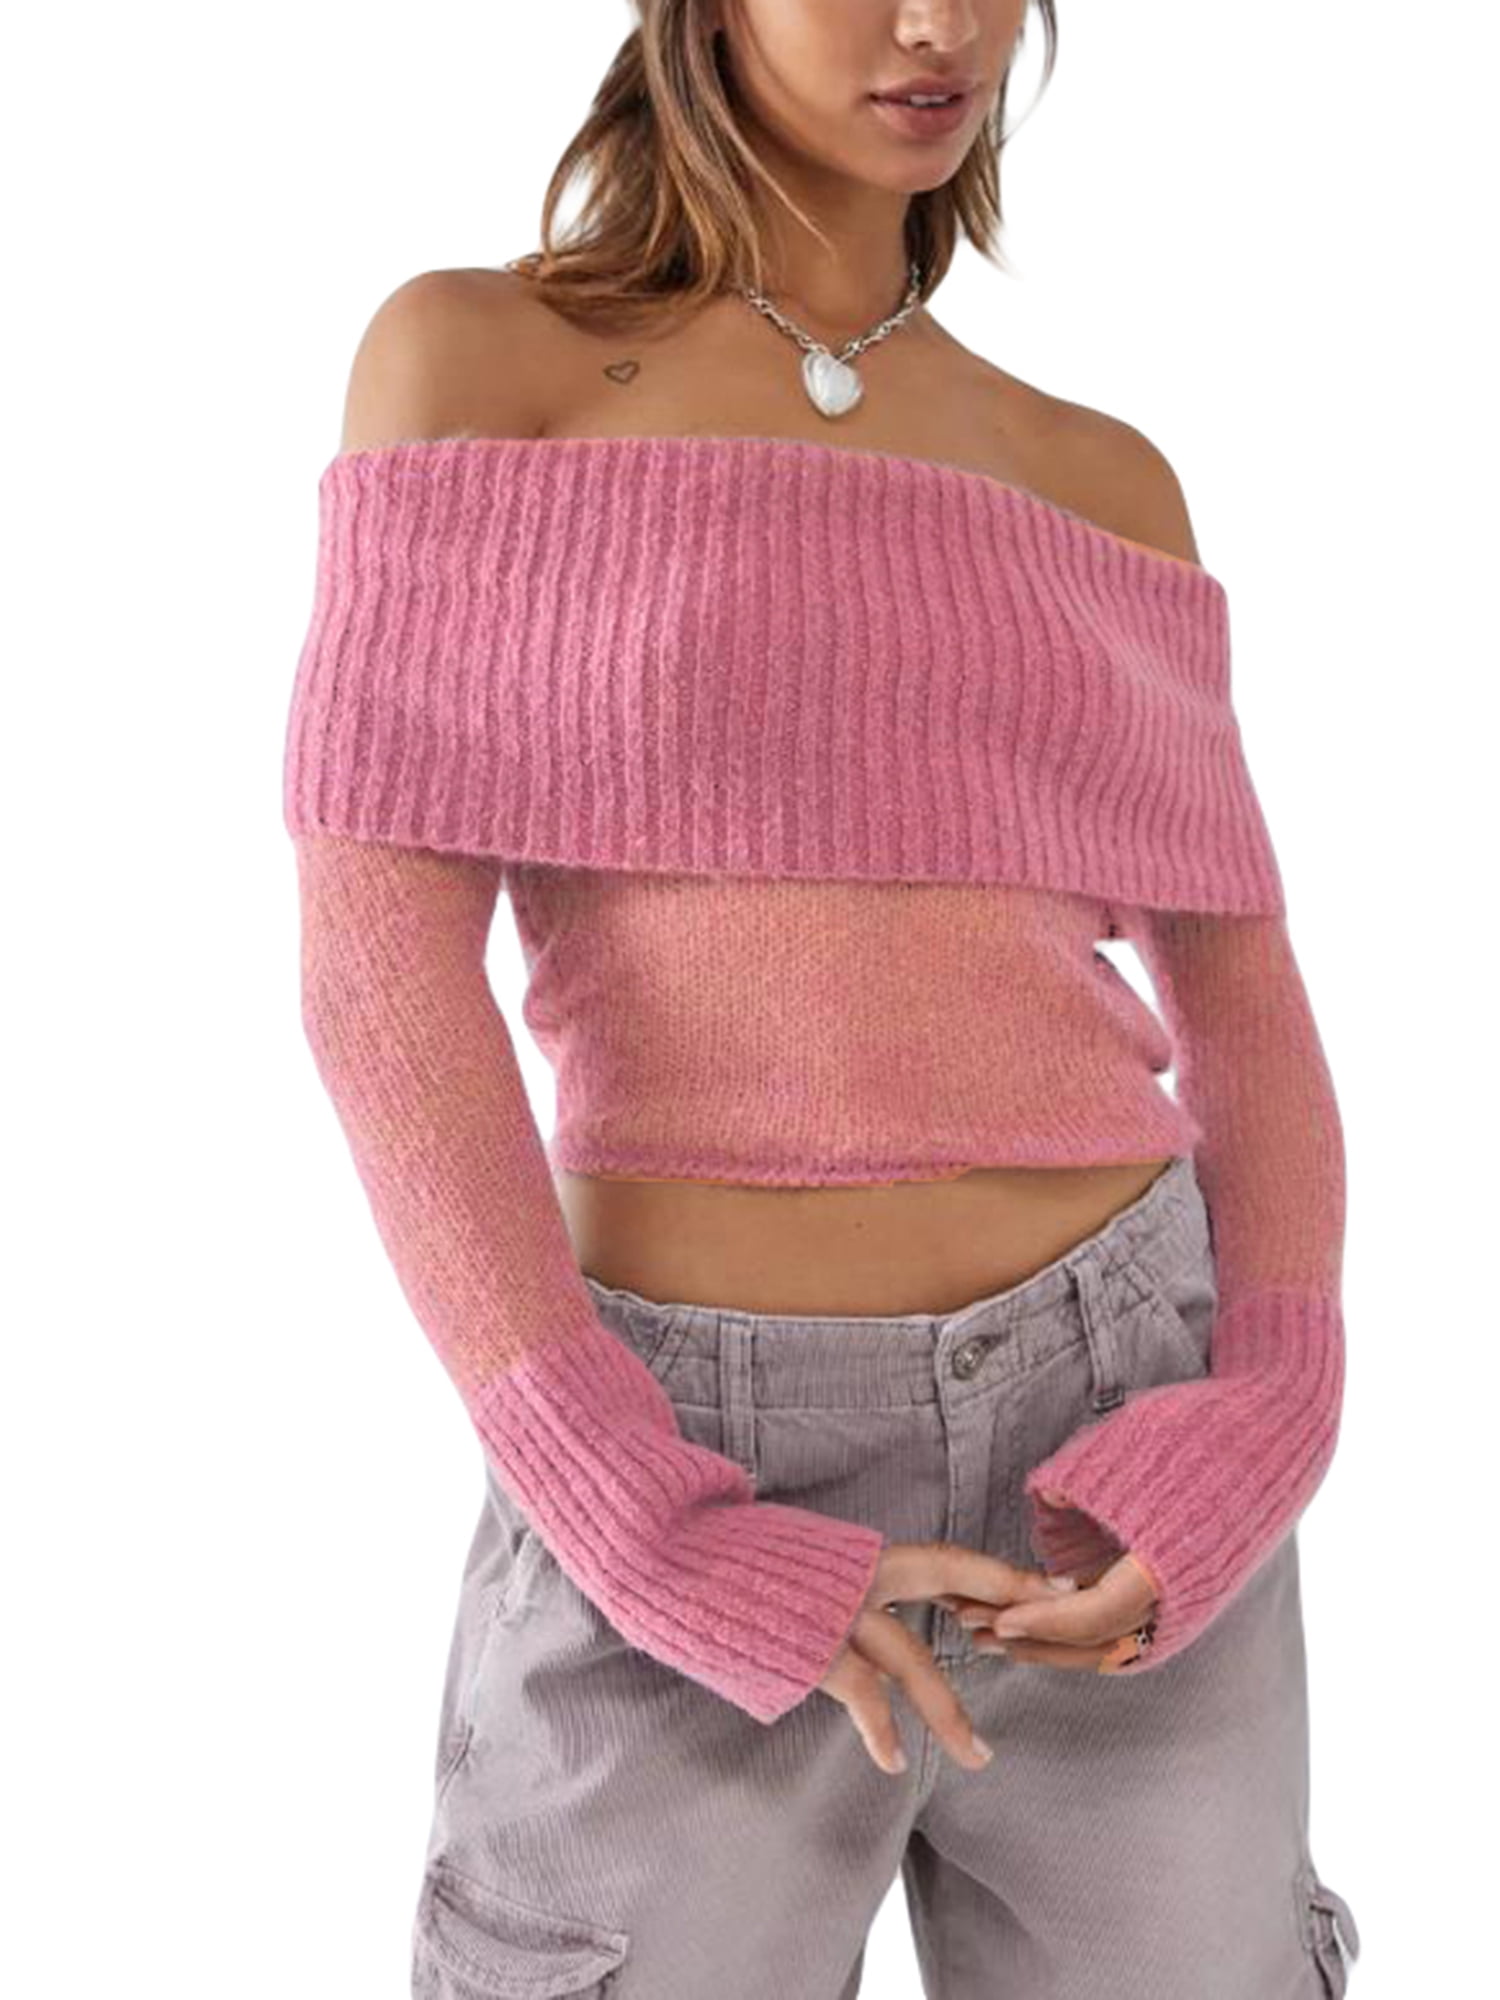 Caitzr Women S Long Sleeve Off Shoulder Shirts Knit Cropped Y2k Sweater